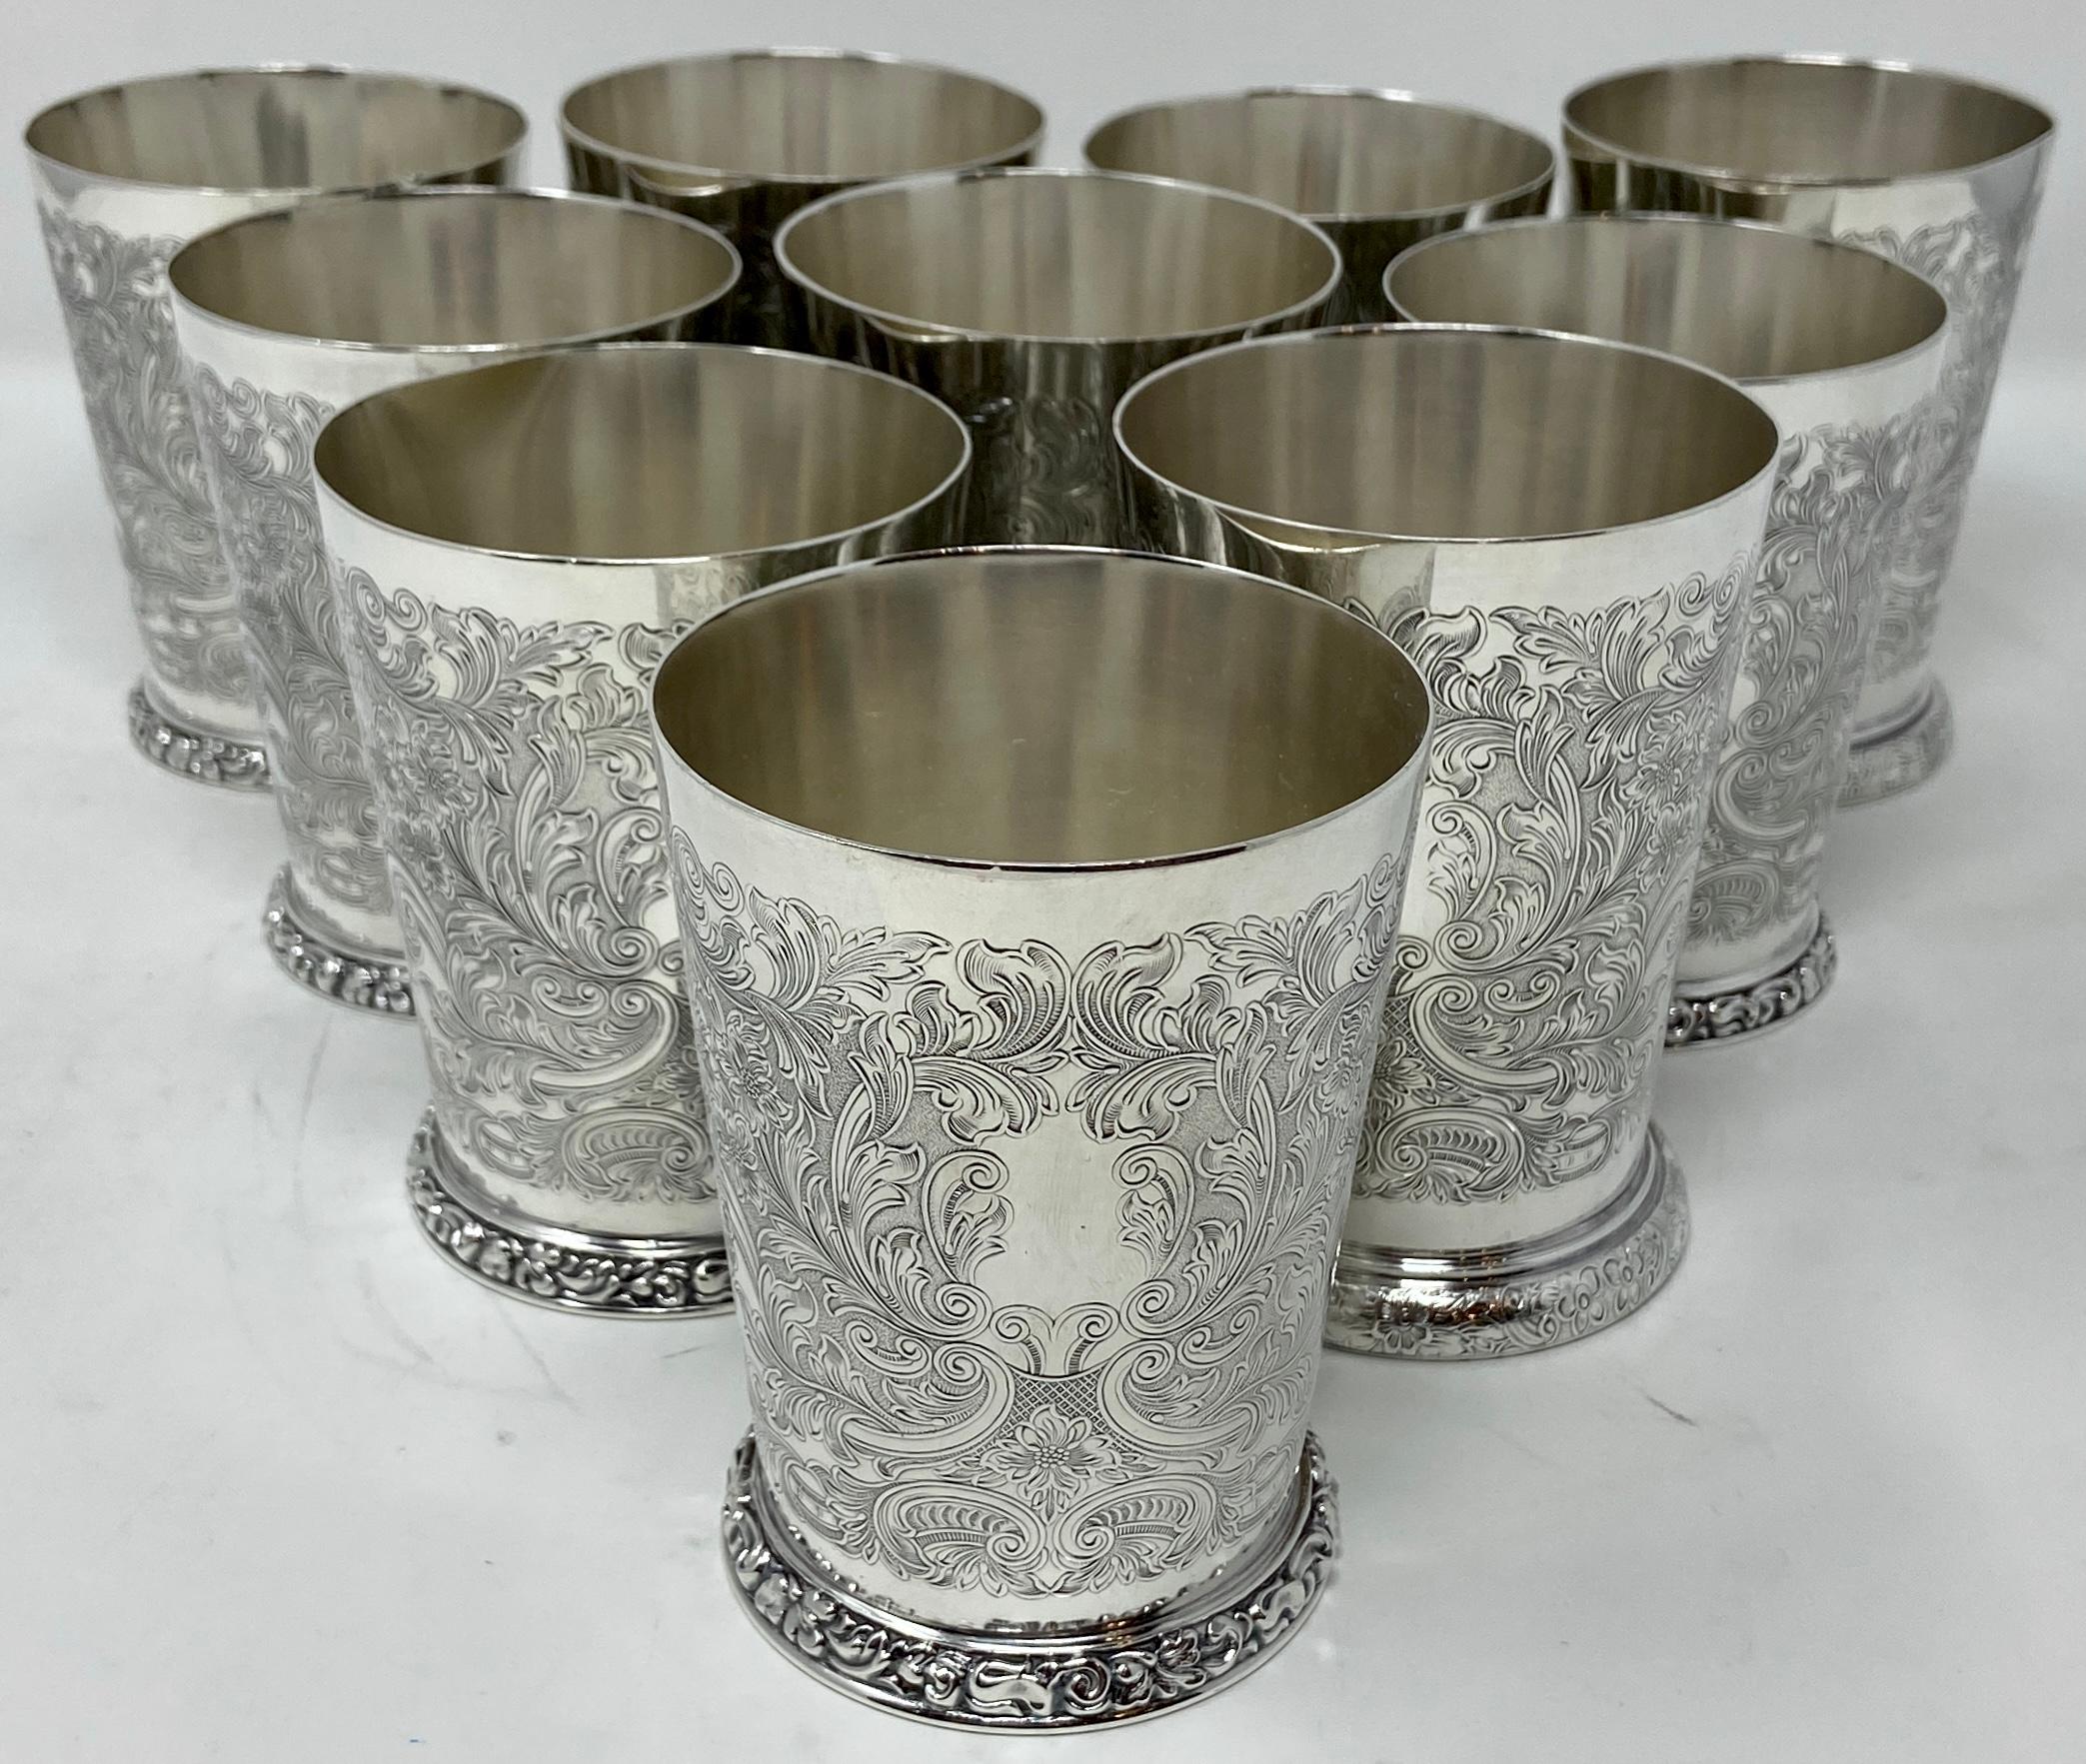 Set of 10 Estate Mid-20th Century English Silver-Plated Finely Engraved Mint Julep Cups.